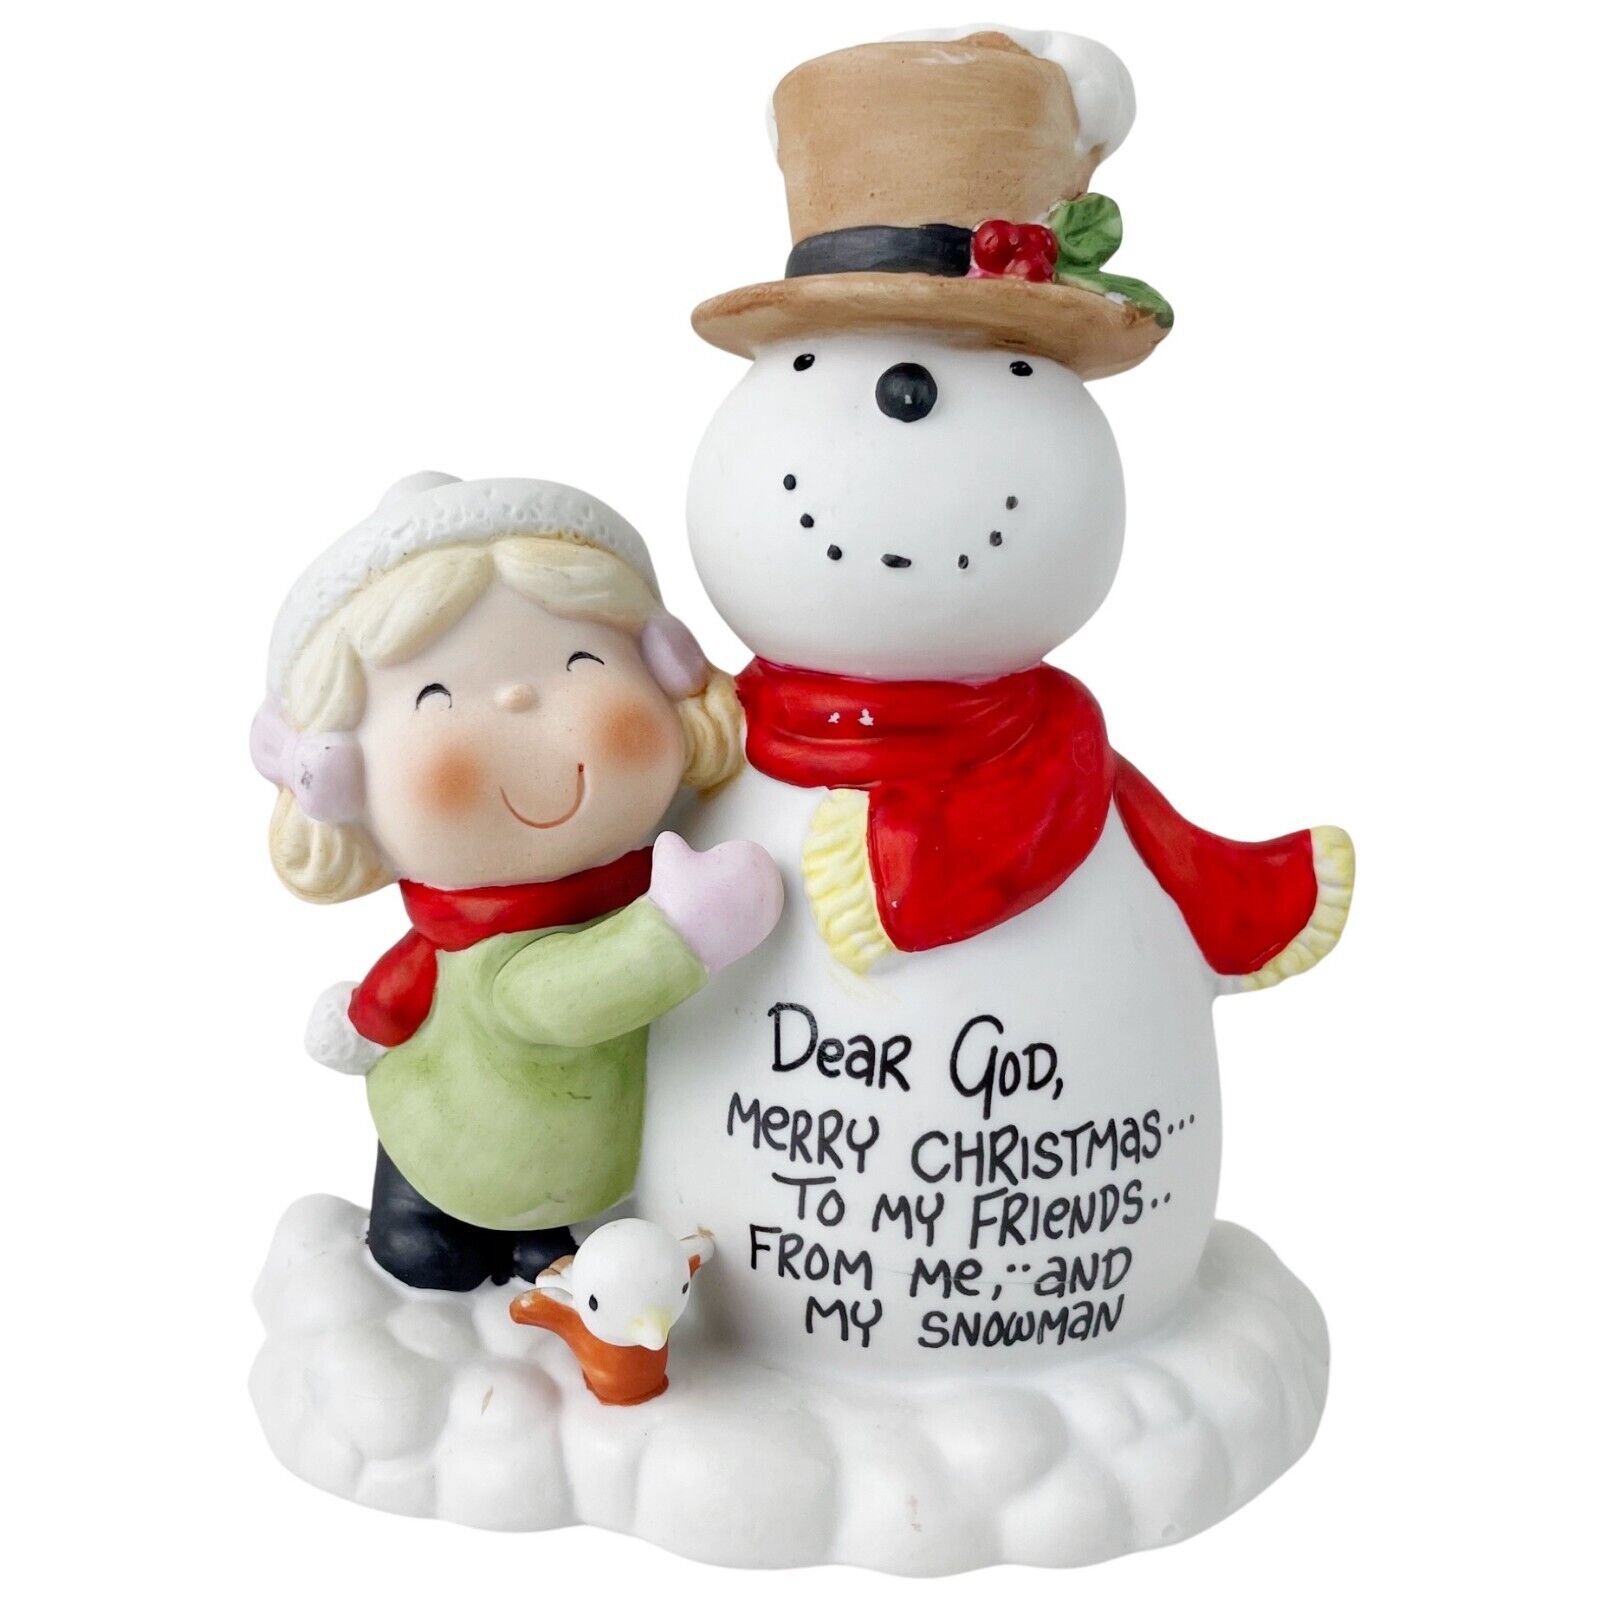 Enesco Dear God Kids Figurine Merry Christmas From Me and My Snowman Holiday 5\